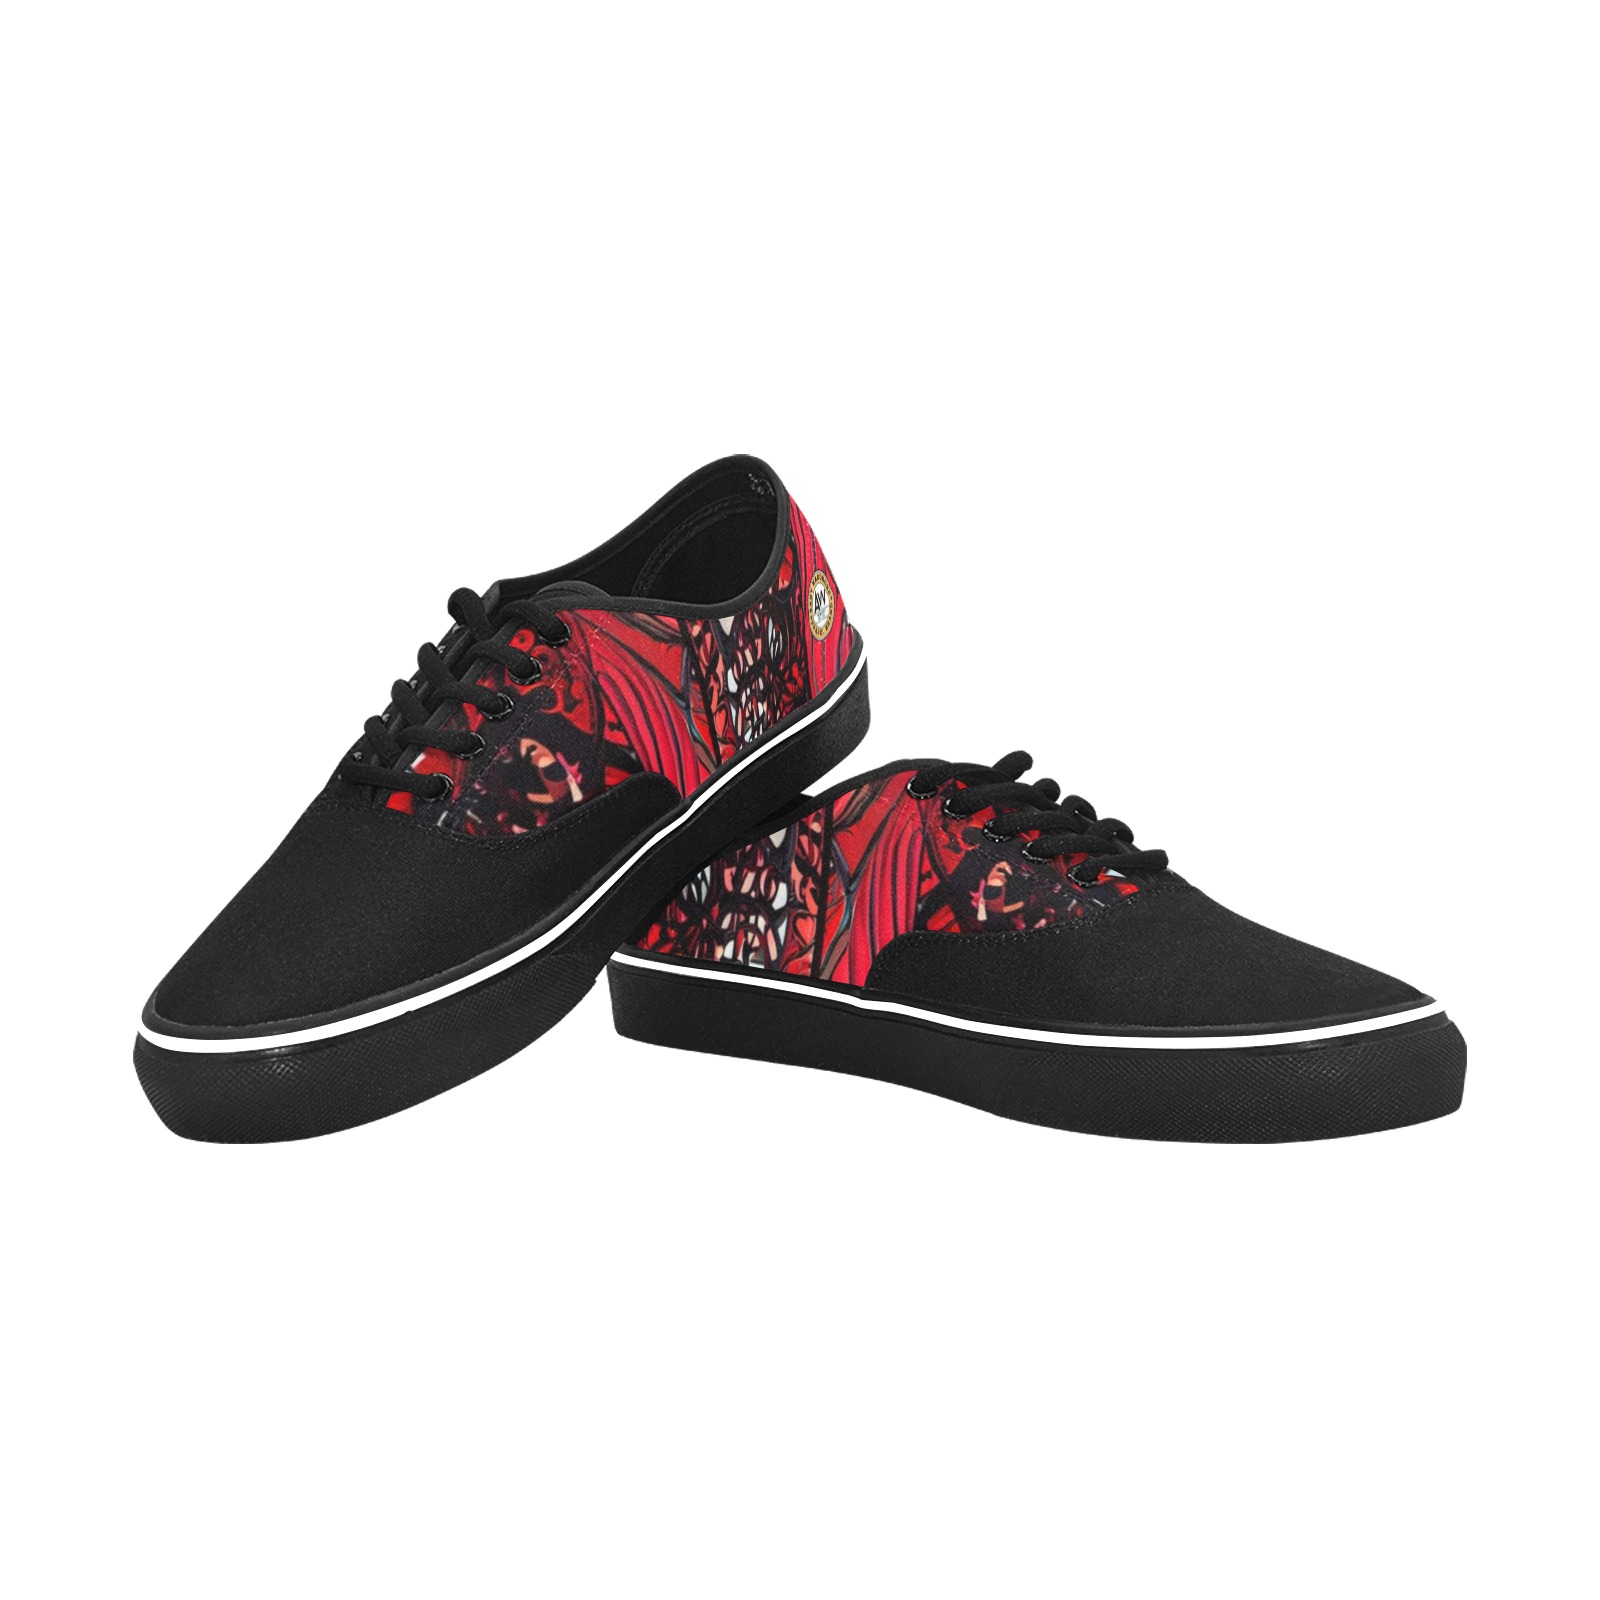 red and black intricate pattern 1 Classic Men's Canvas Low Top Shoes (Model E001-4)